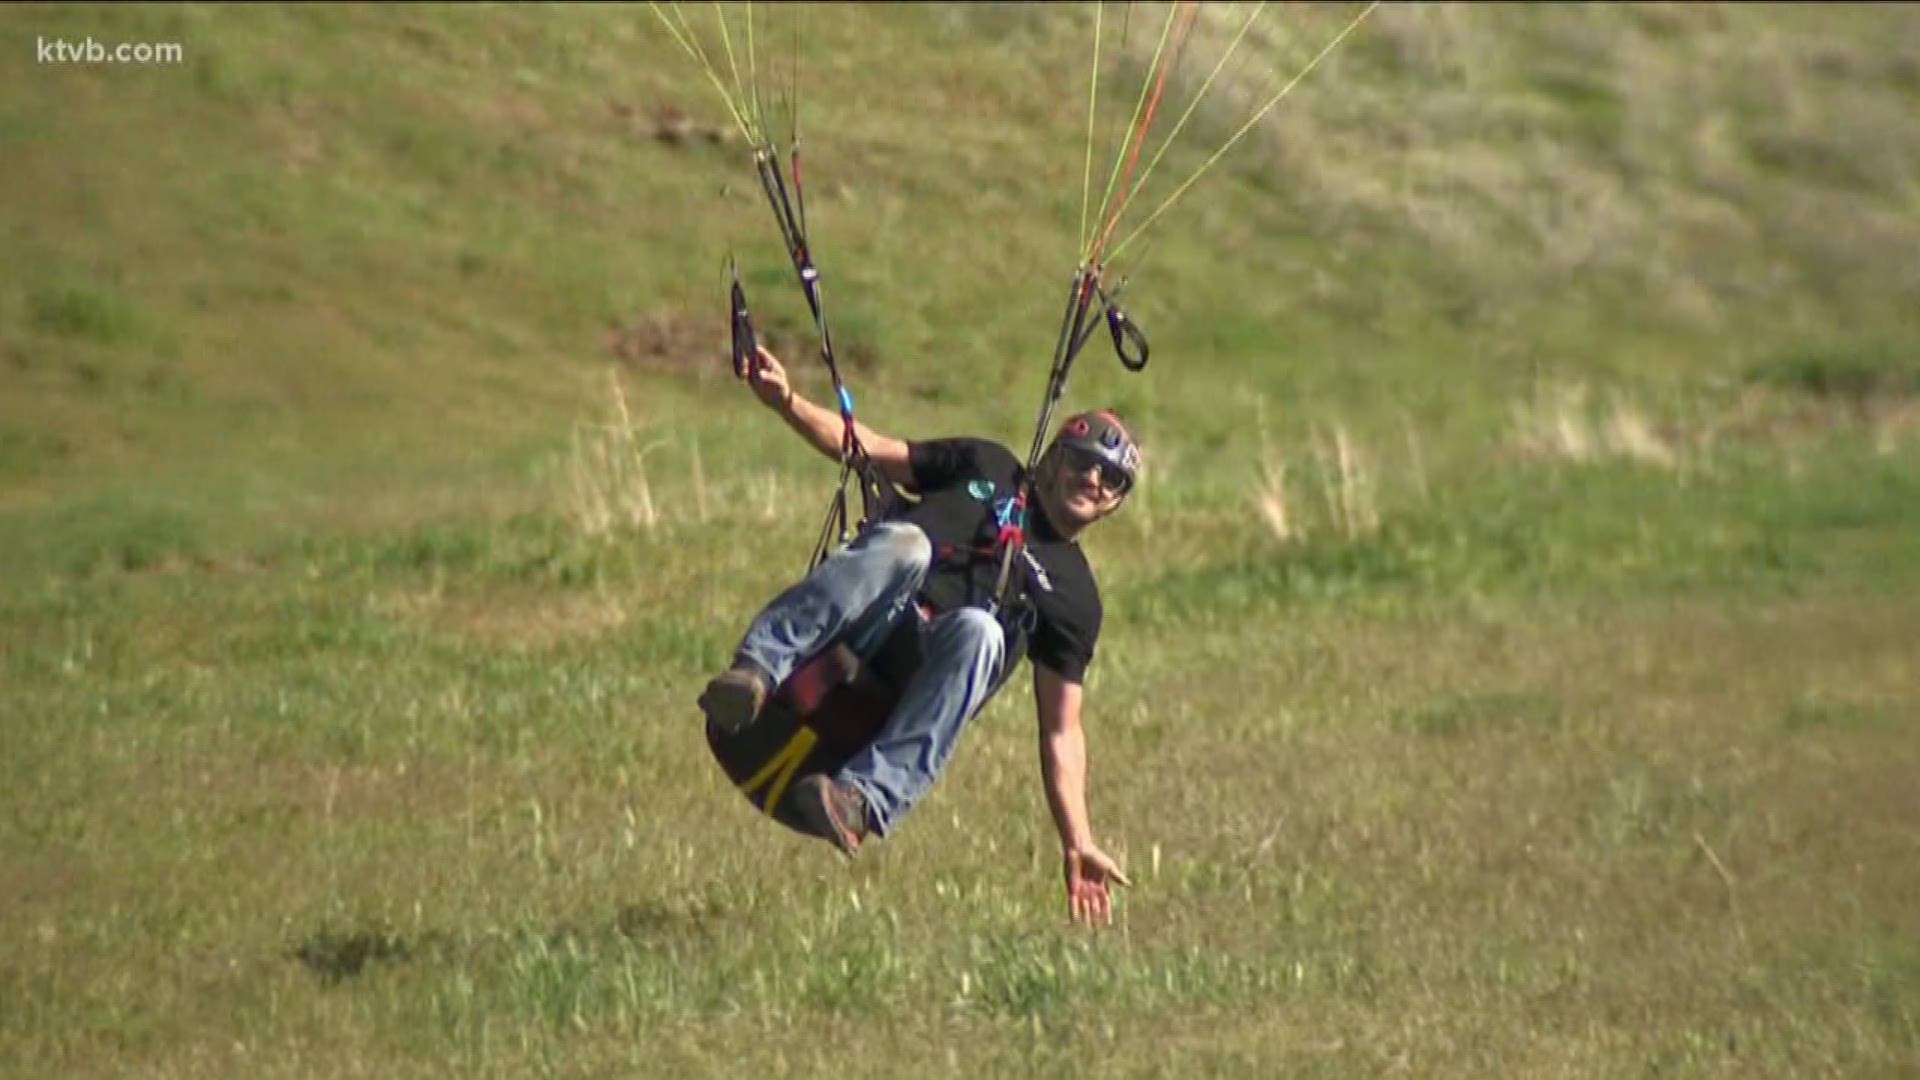 The victim is 38-year-old Justin Boer, the co-founder of the Horseshoe Bend Flight Park on Old Emmett Road. Boer's accident happened at about 11 a.m. at the park. Officials have not released what caused Boer, an experienced paraglider and instructor, to wreck the craft. He was pronounced dead at the scene.